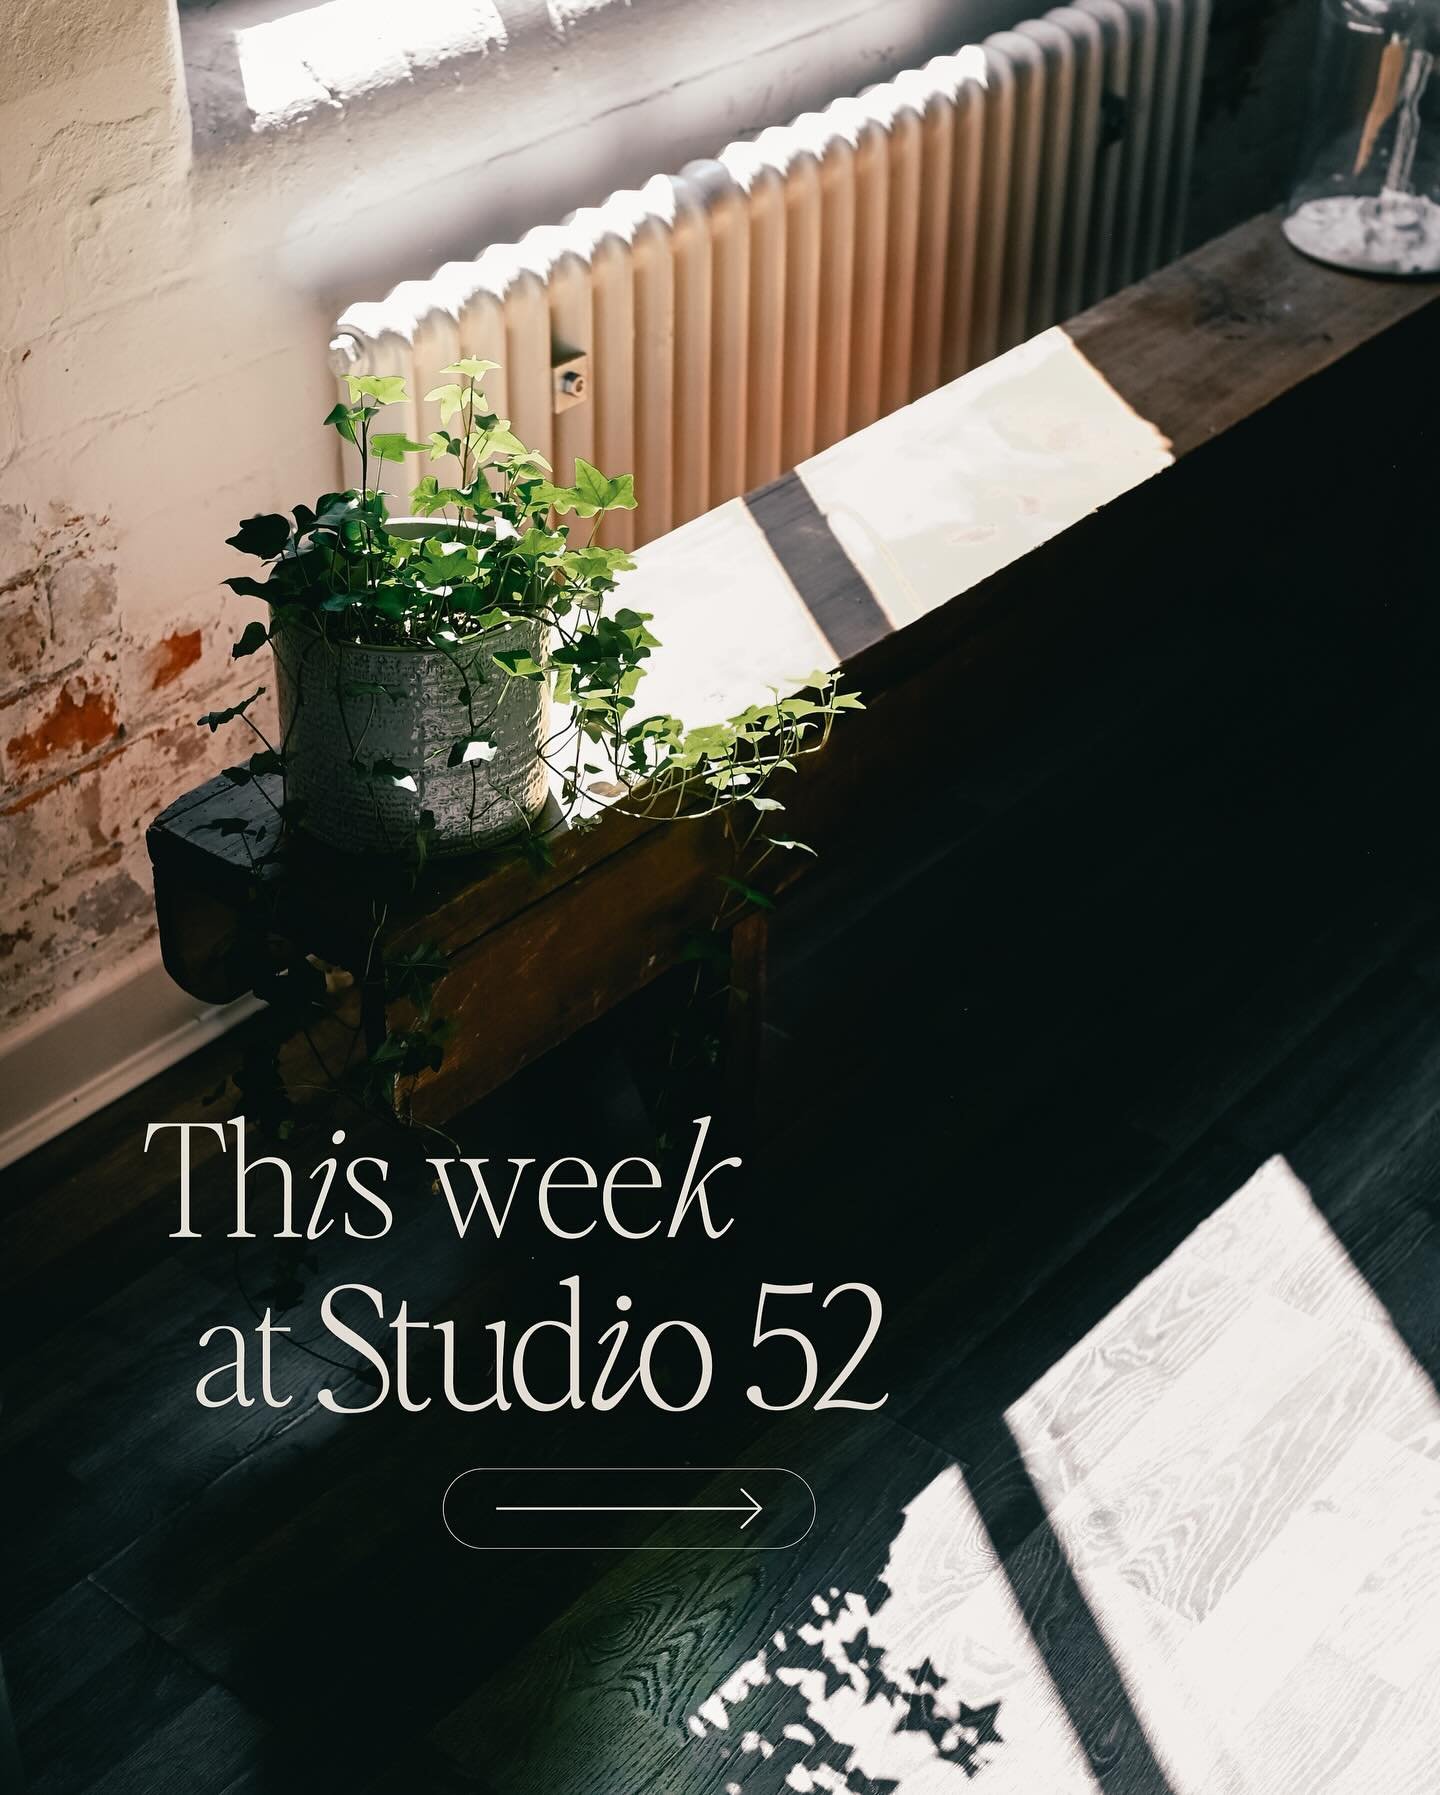 SWIPE TO SEE WHAT&rsquo;S ON IN THE STUDIO THIS WEEK 👉

To book a class, you can use your monthly membership, your class pass or simply drop-in.

To book an event, you can sign up directly with the hosts via the links through our website /events pag